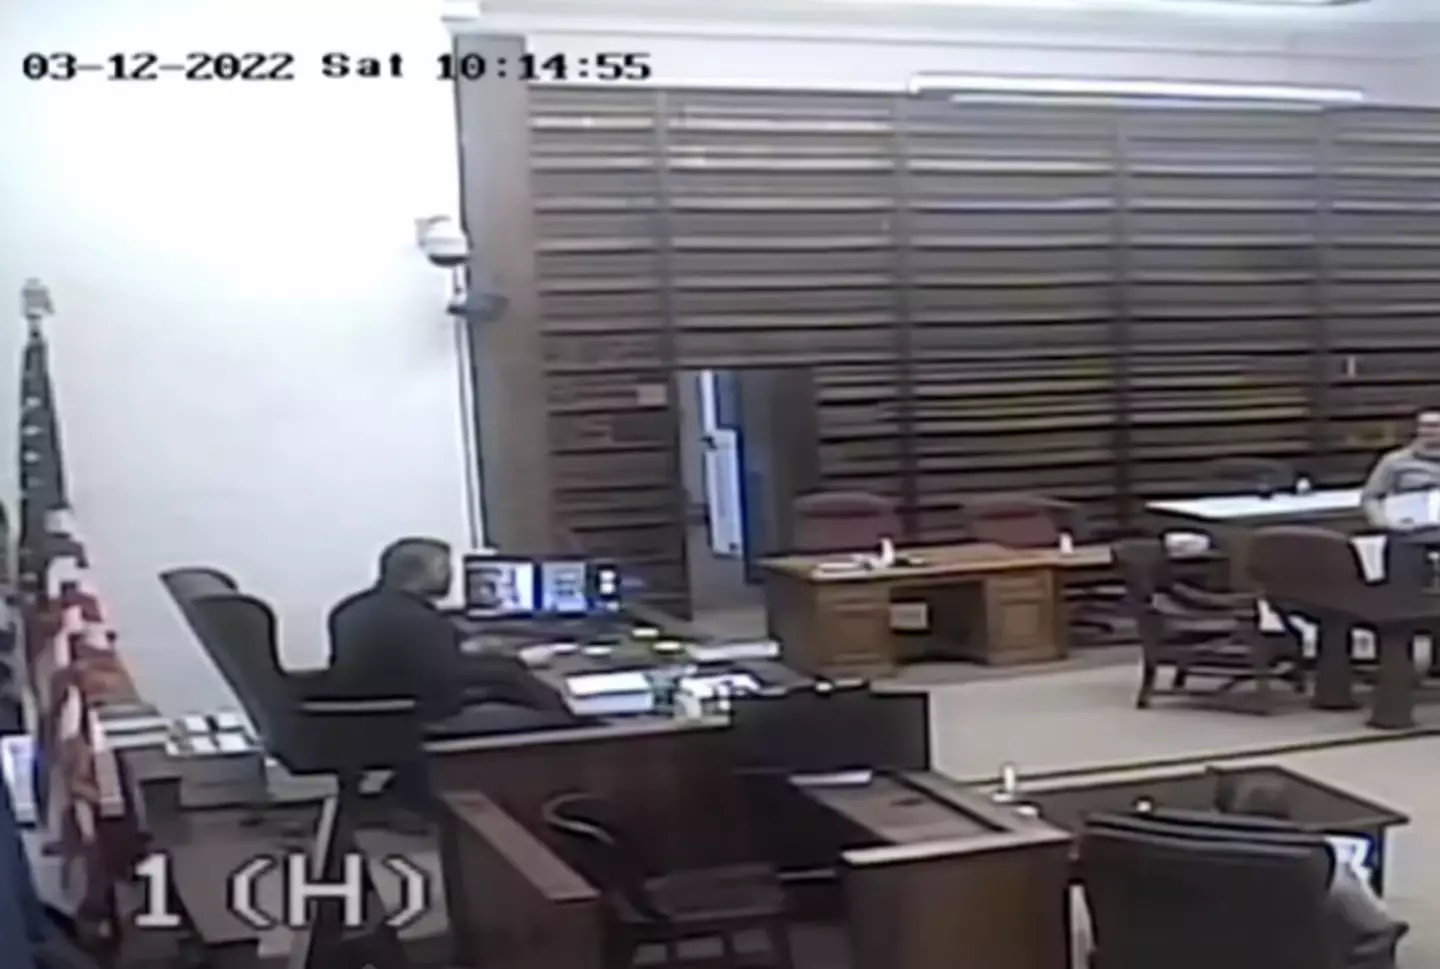 The judge shockingly pulled out a gun in a New Martinsville, West Virginia courtroom.